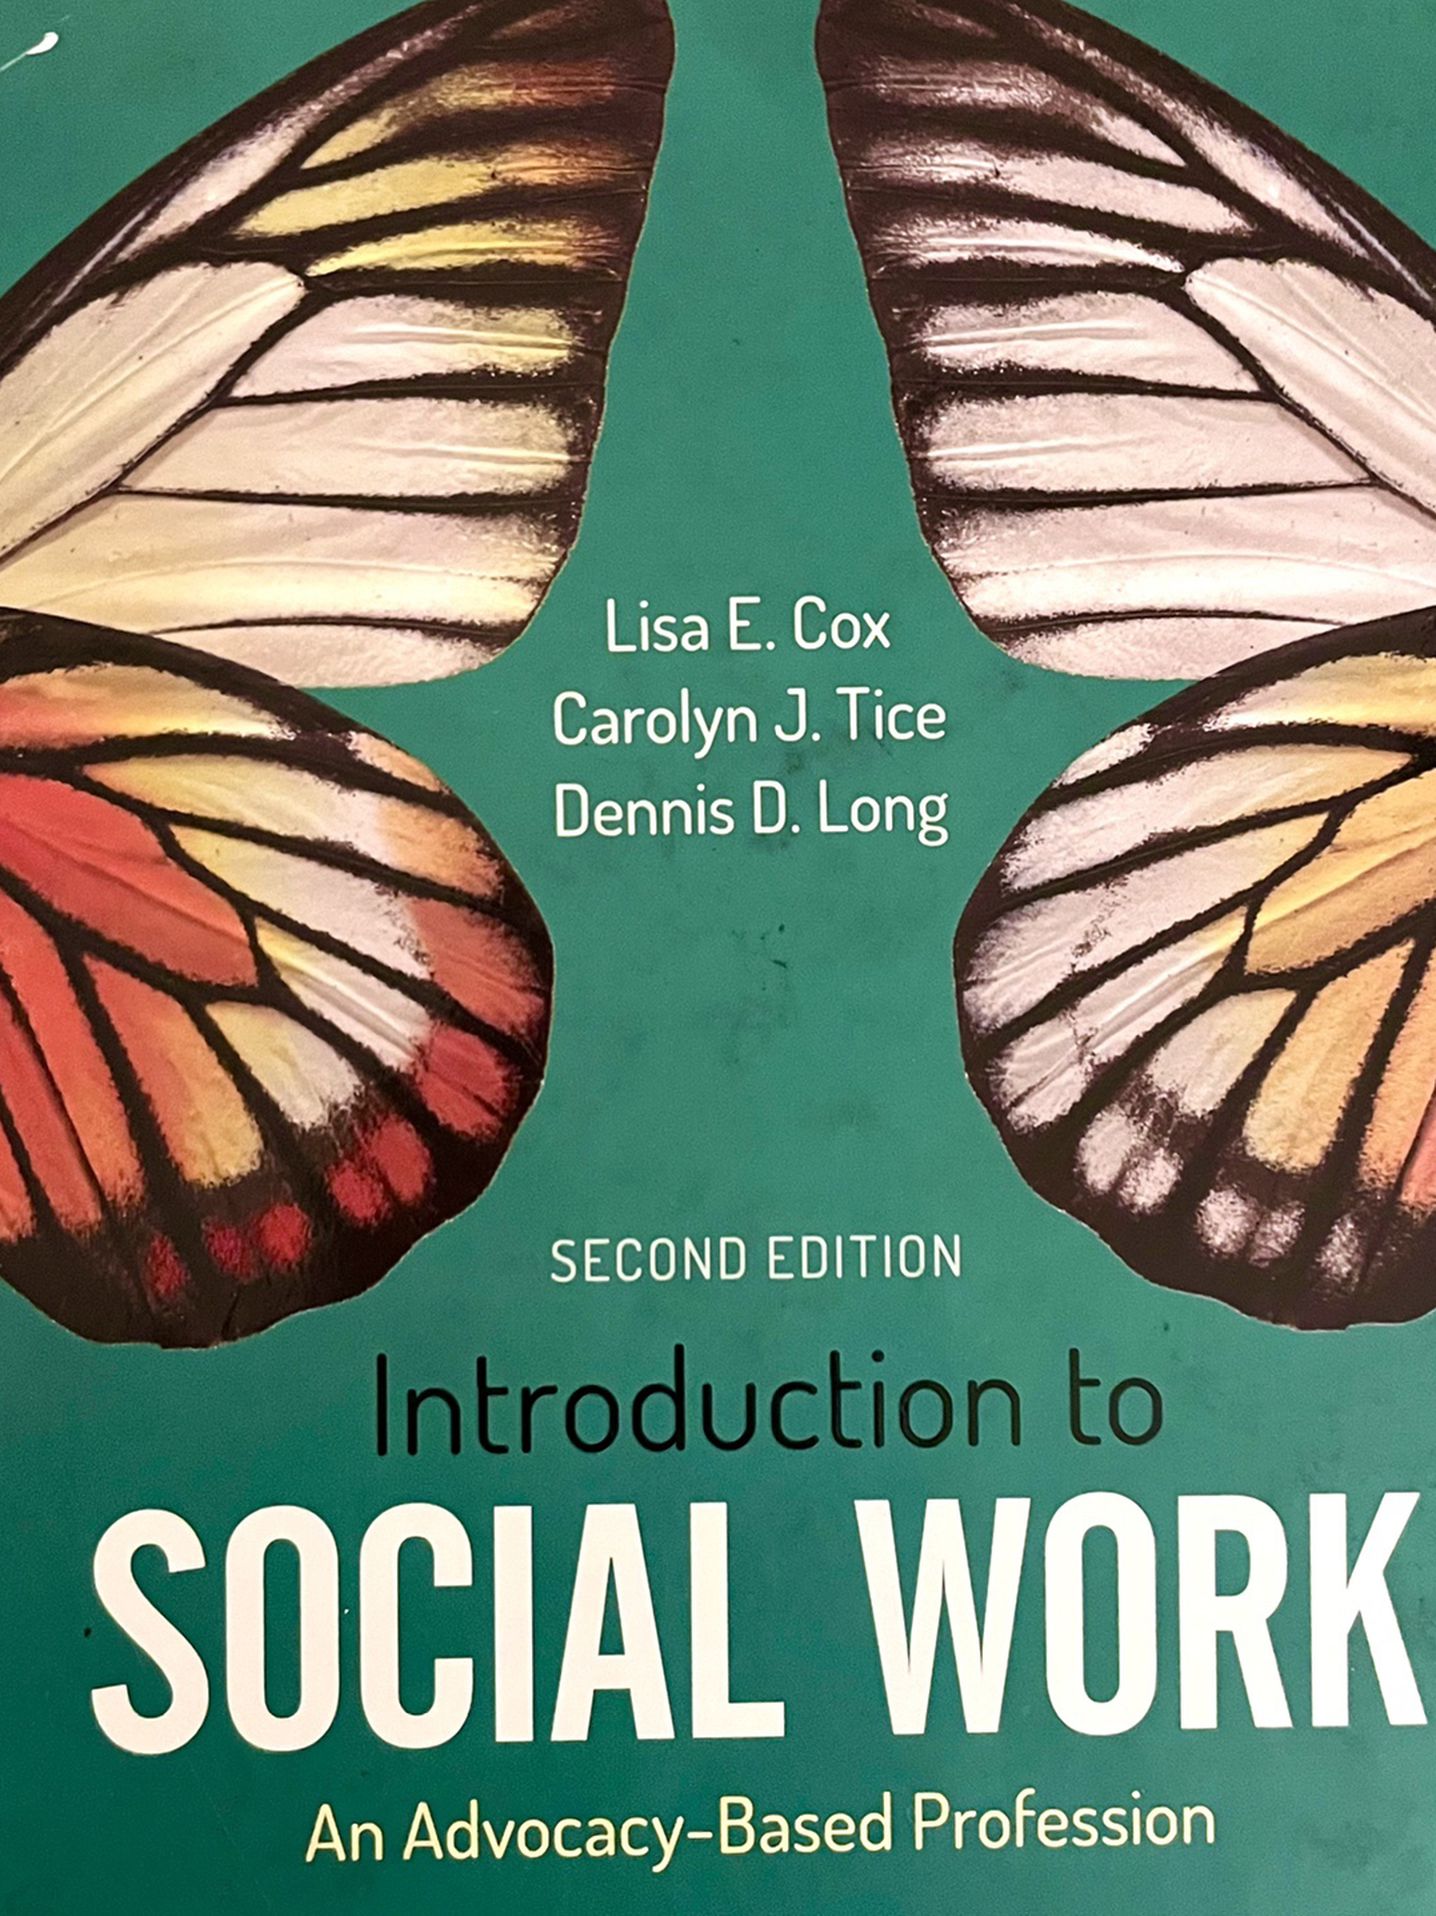 Introduction to Social Work (2nd Edition) Textbook